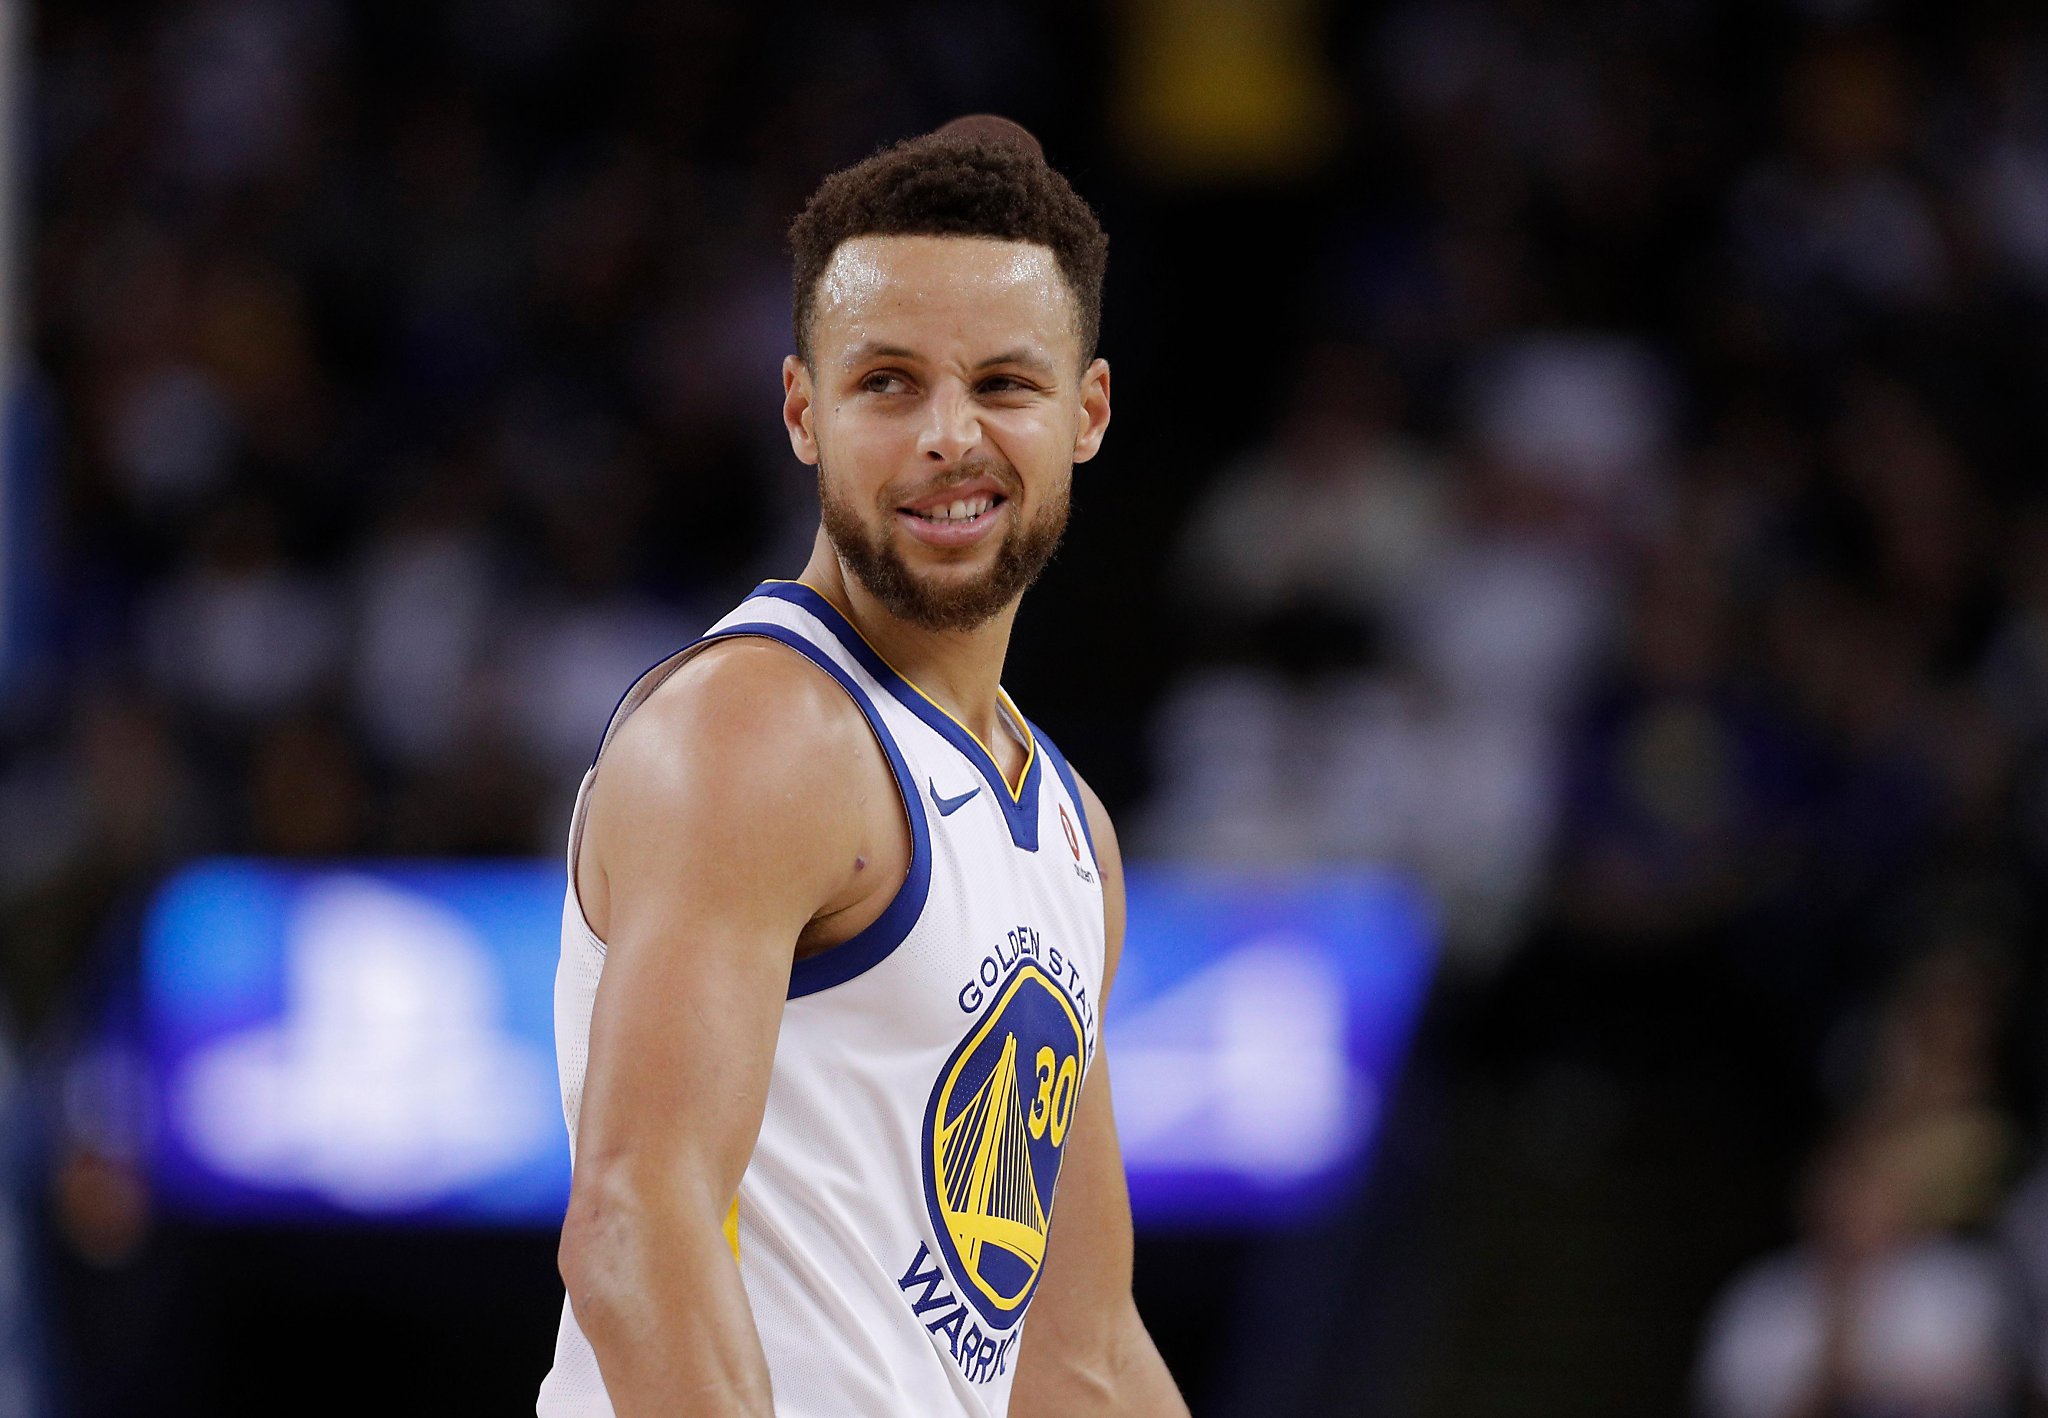 Stephen Curry plans to return to 3-point contest in 2019 - Midland Daily News2048 x 1418